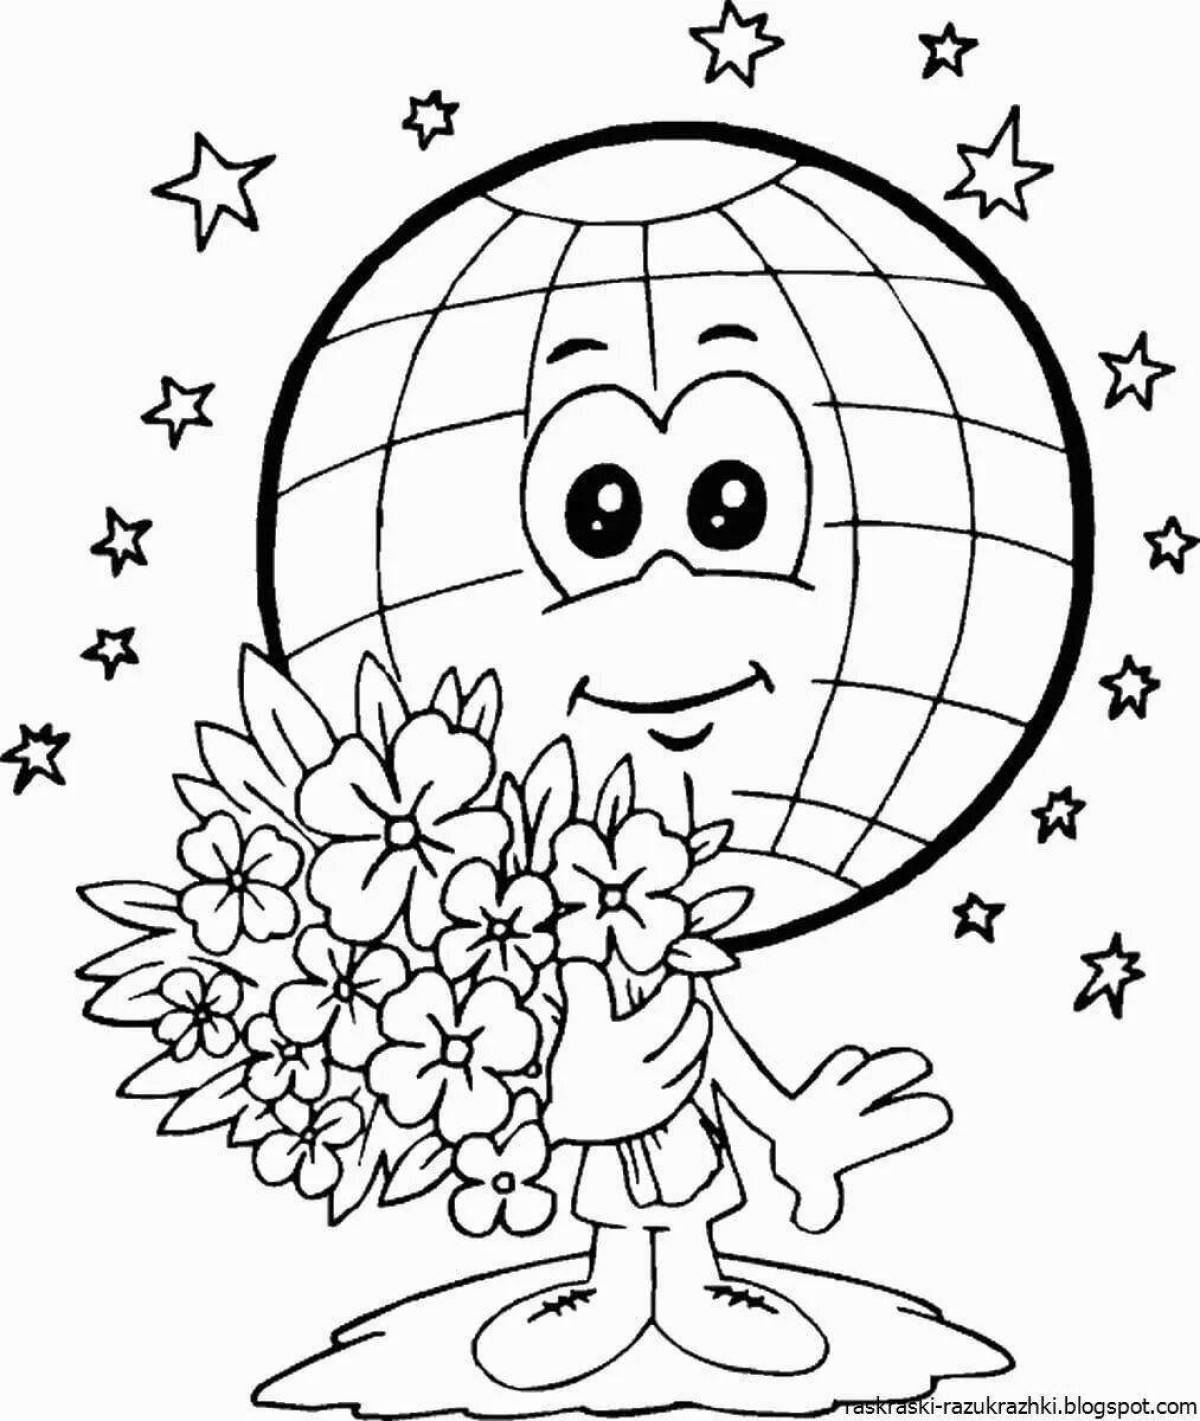 Exalting peace on earth coloring page